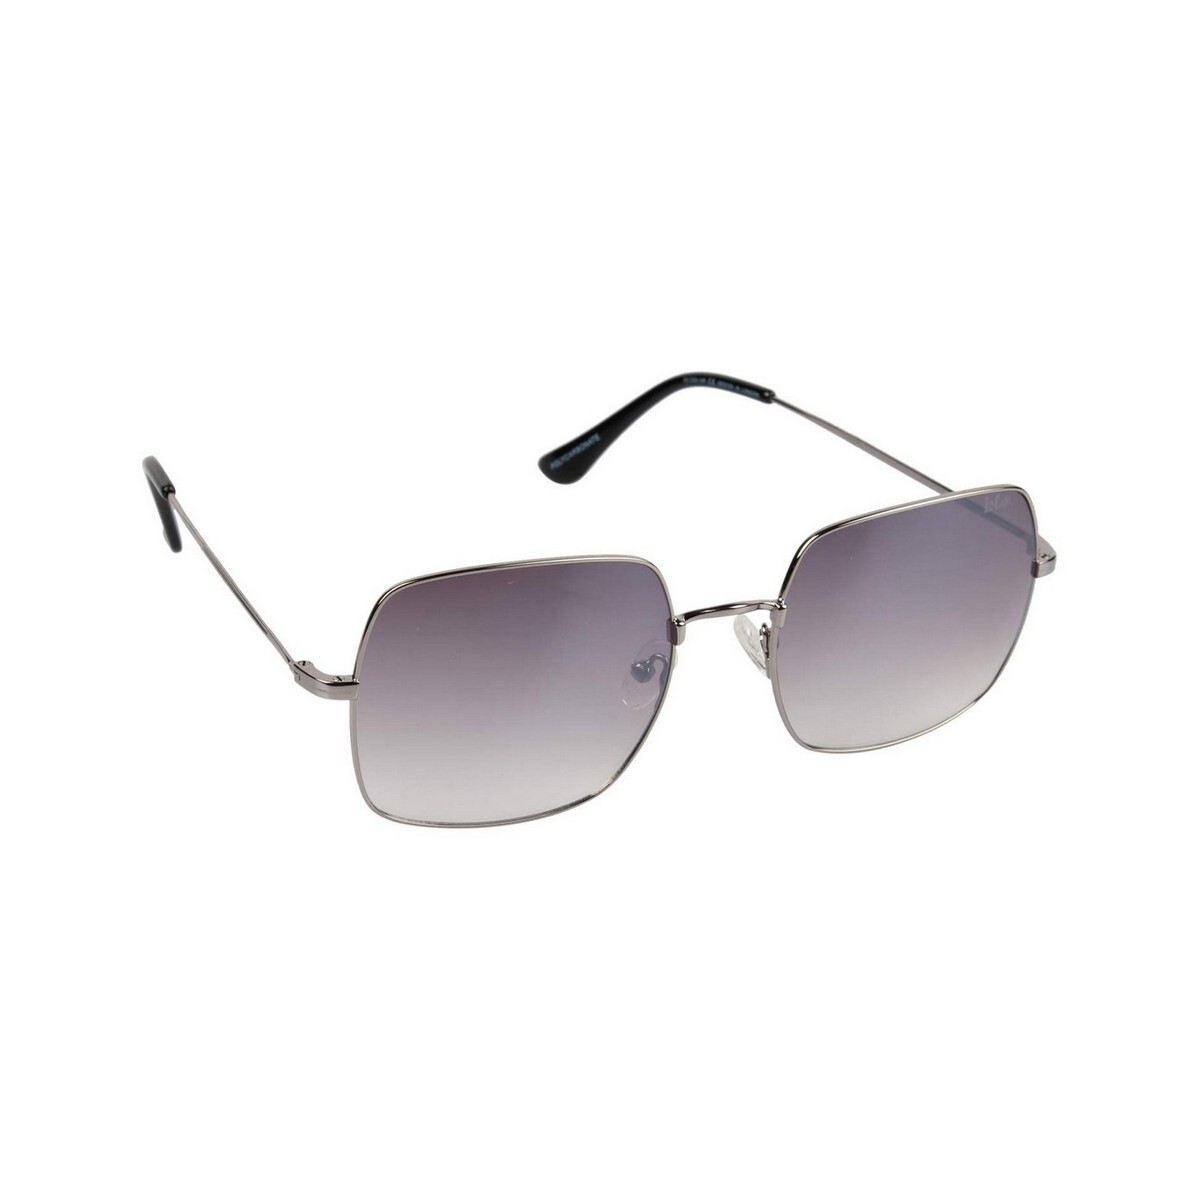 Lee Cooper Female Silver Frame With Grey Lens Sunglass